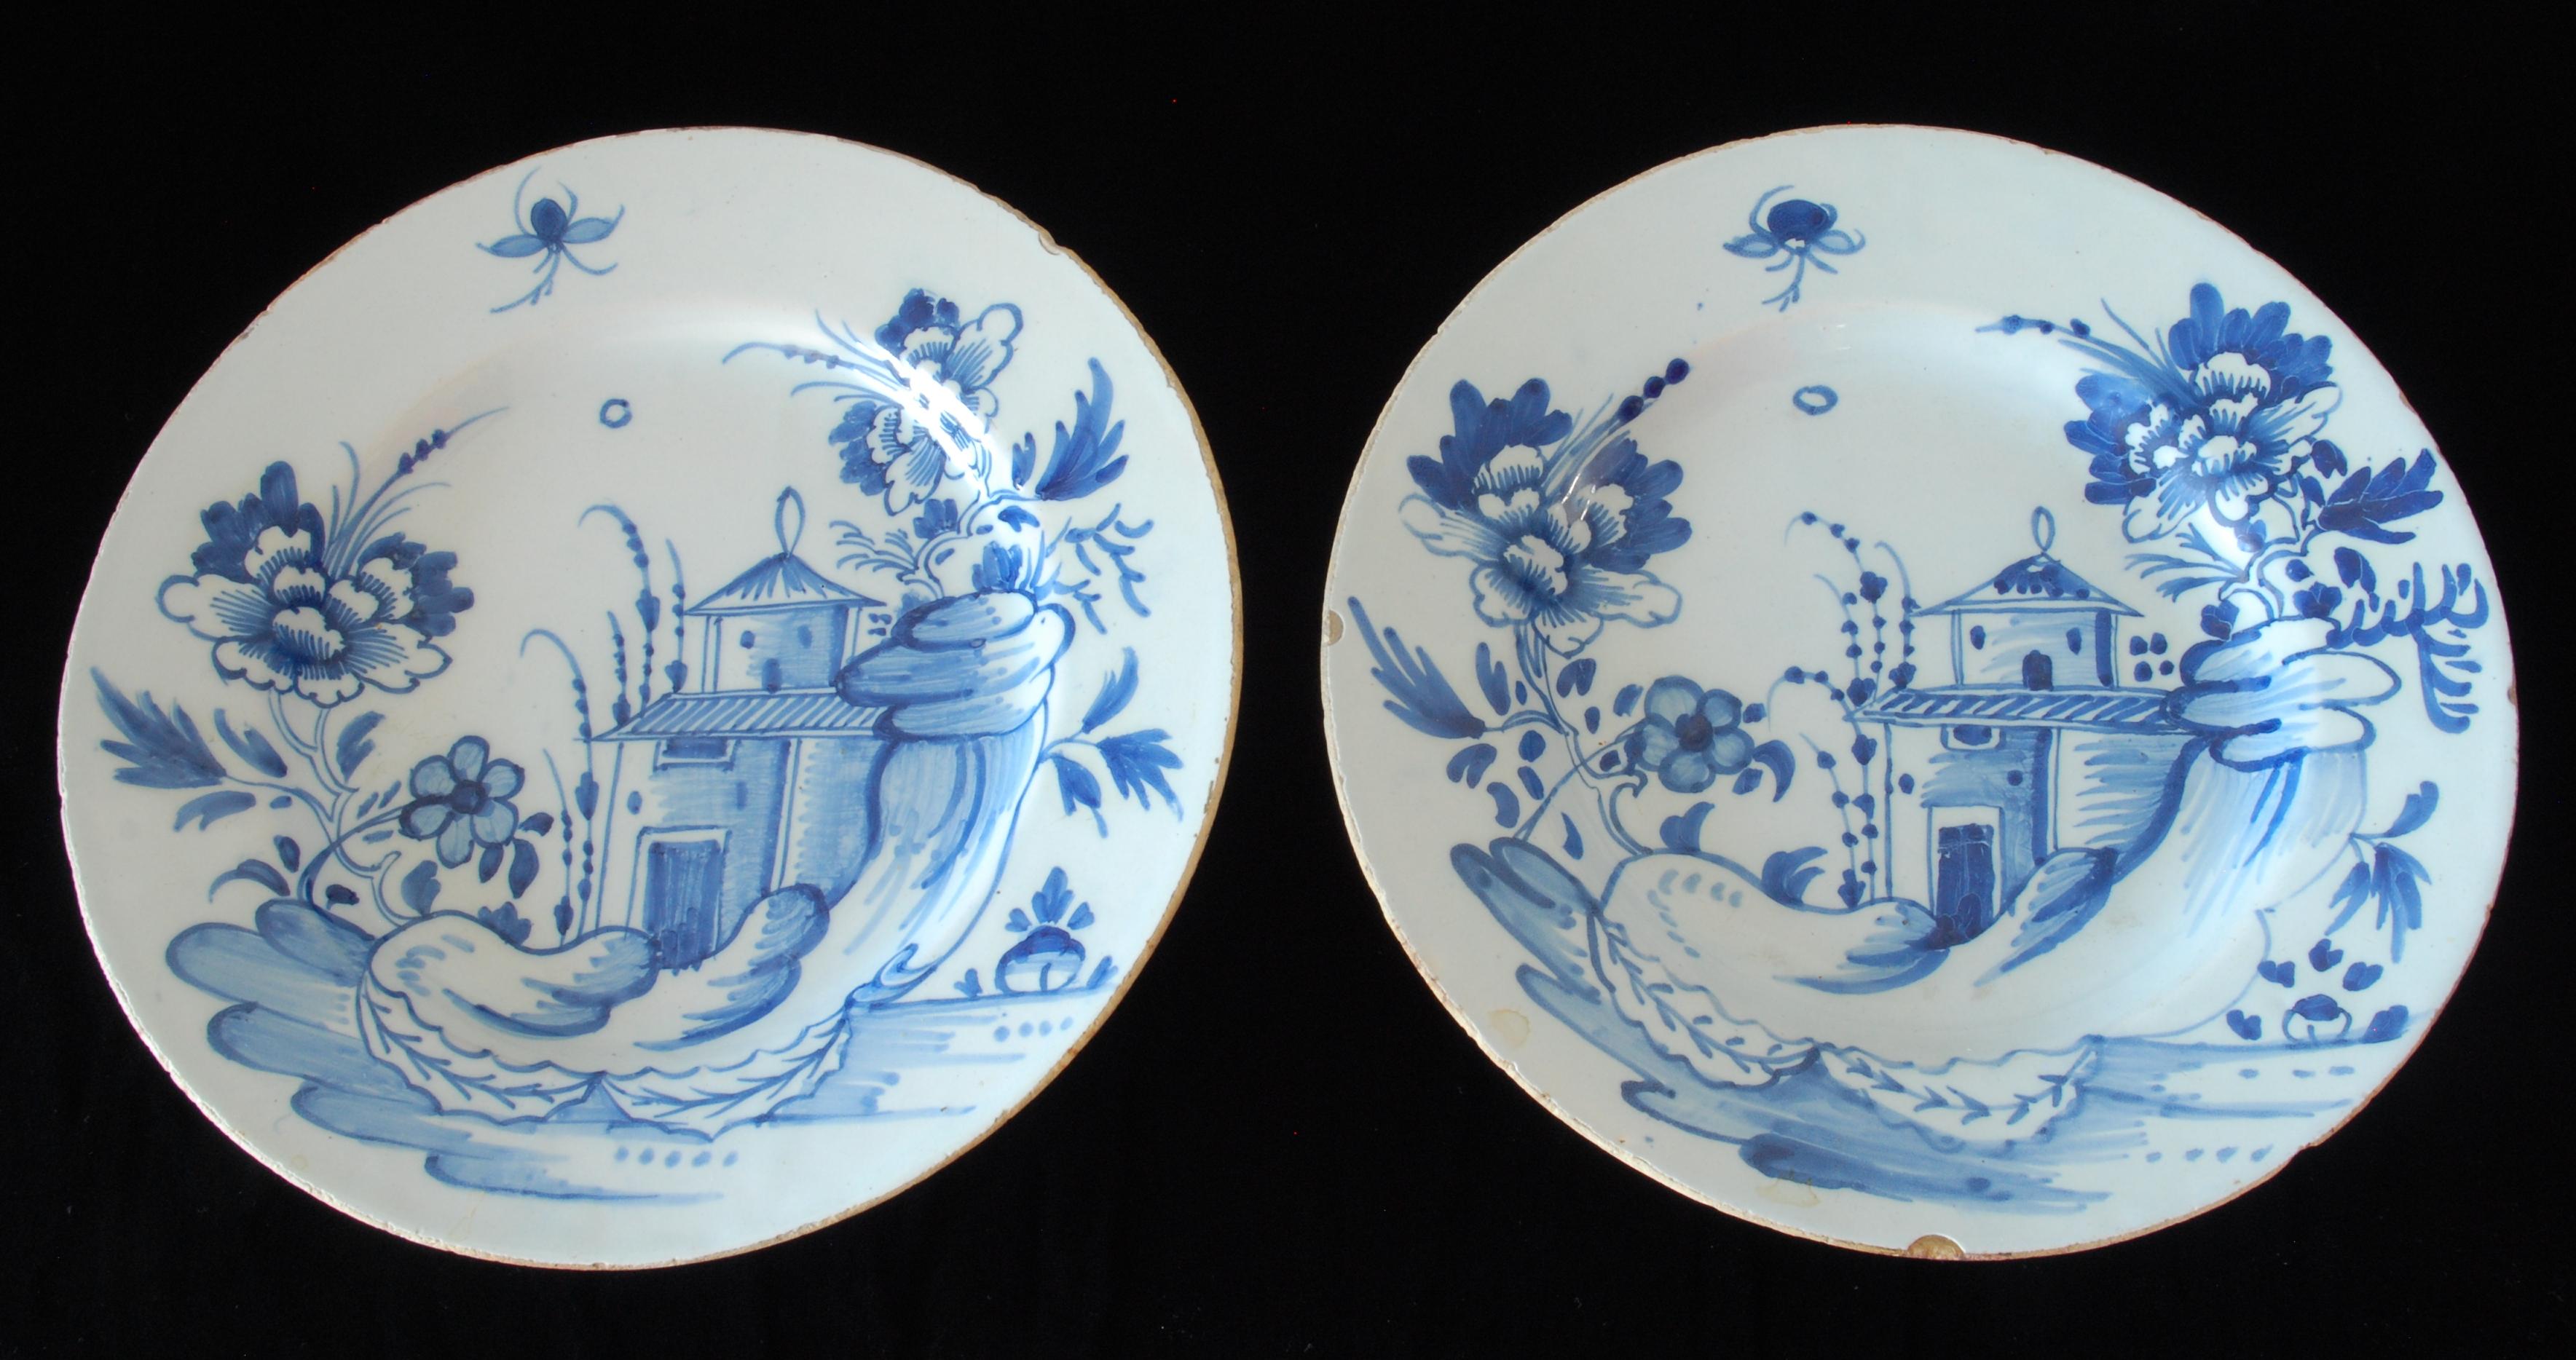 A pair of plates painted with a pagoda in a garden after a contemporary Chinese model.

English Delftware is considered to be one of the most important forms of English ceramic production of the period, and it had a major influence on the